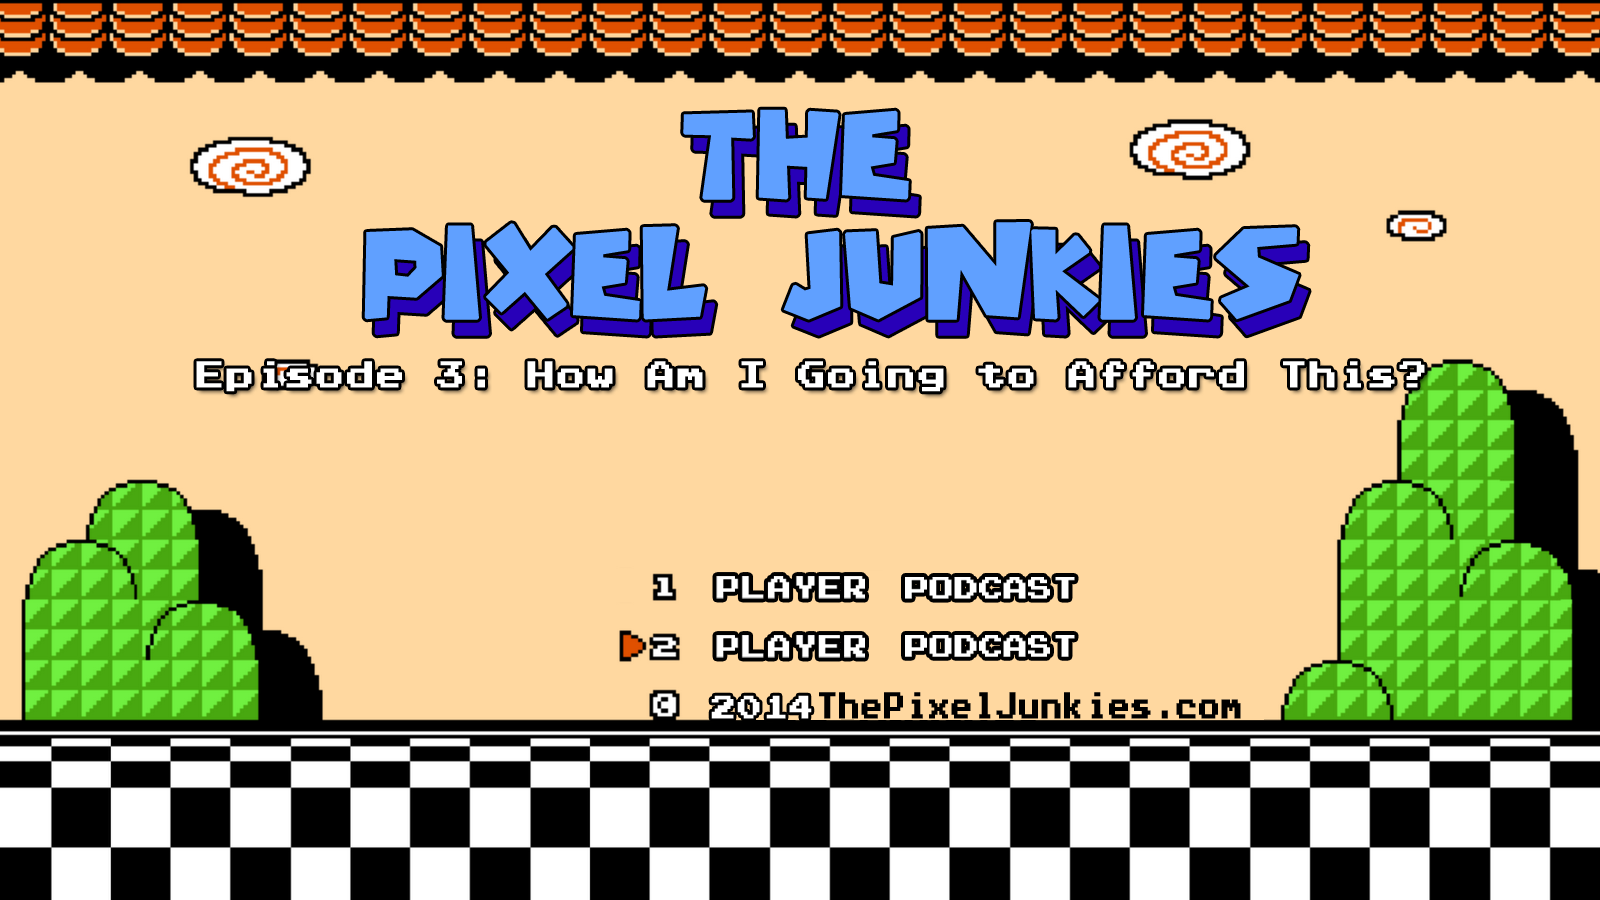 The Pixel Junkies Episode 3: How Am I Going to Afford This?